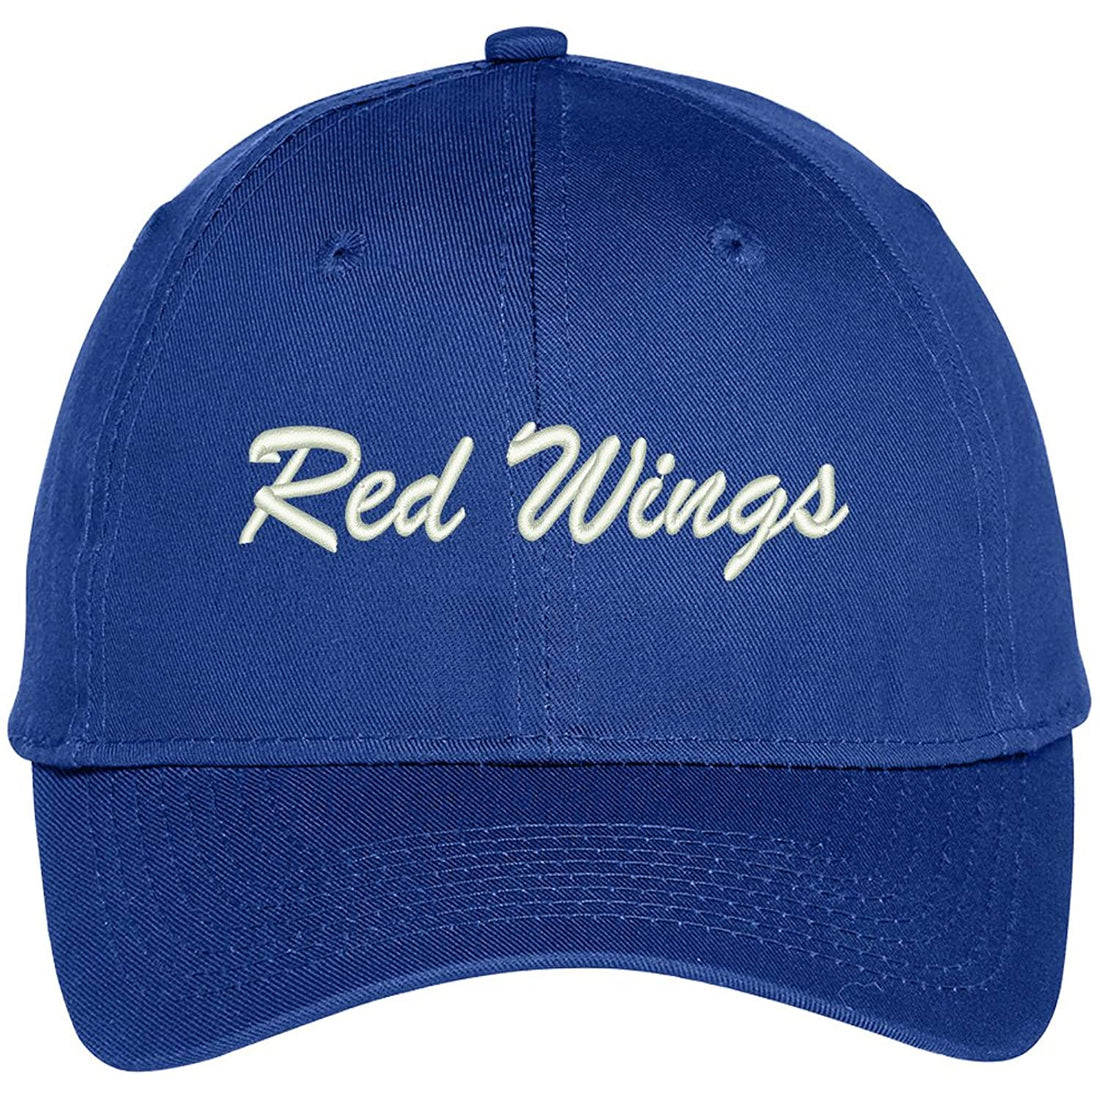 Trendy Apparel Shop Red Wings Embroidered Precurved Adjustable Cap